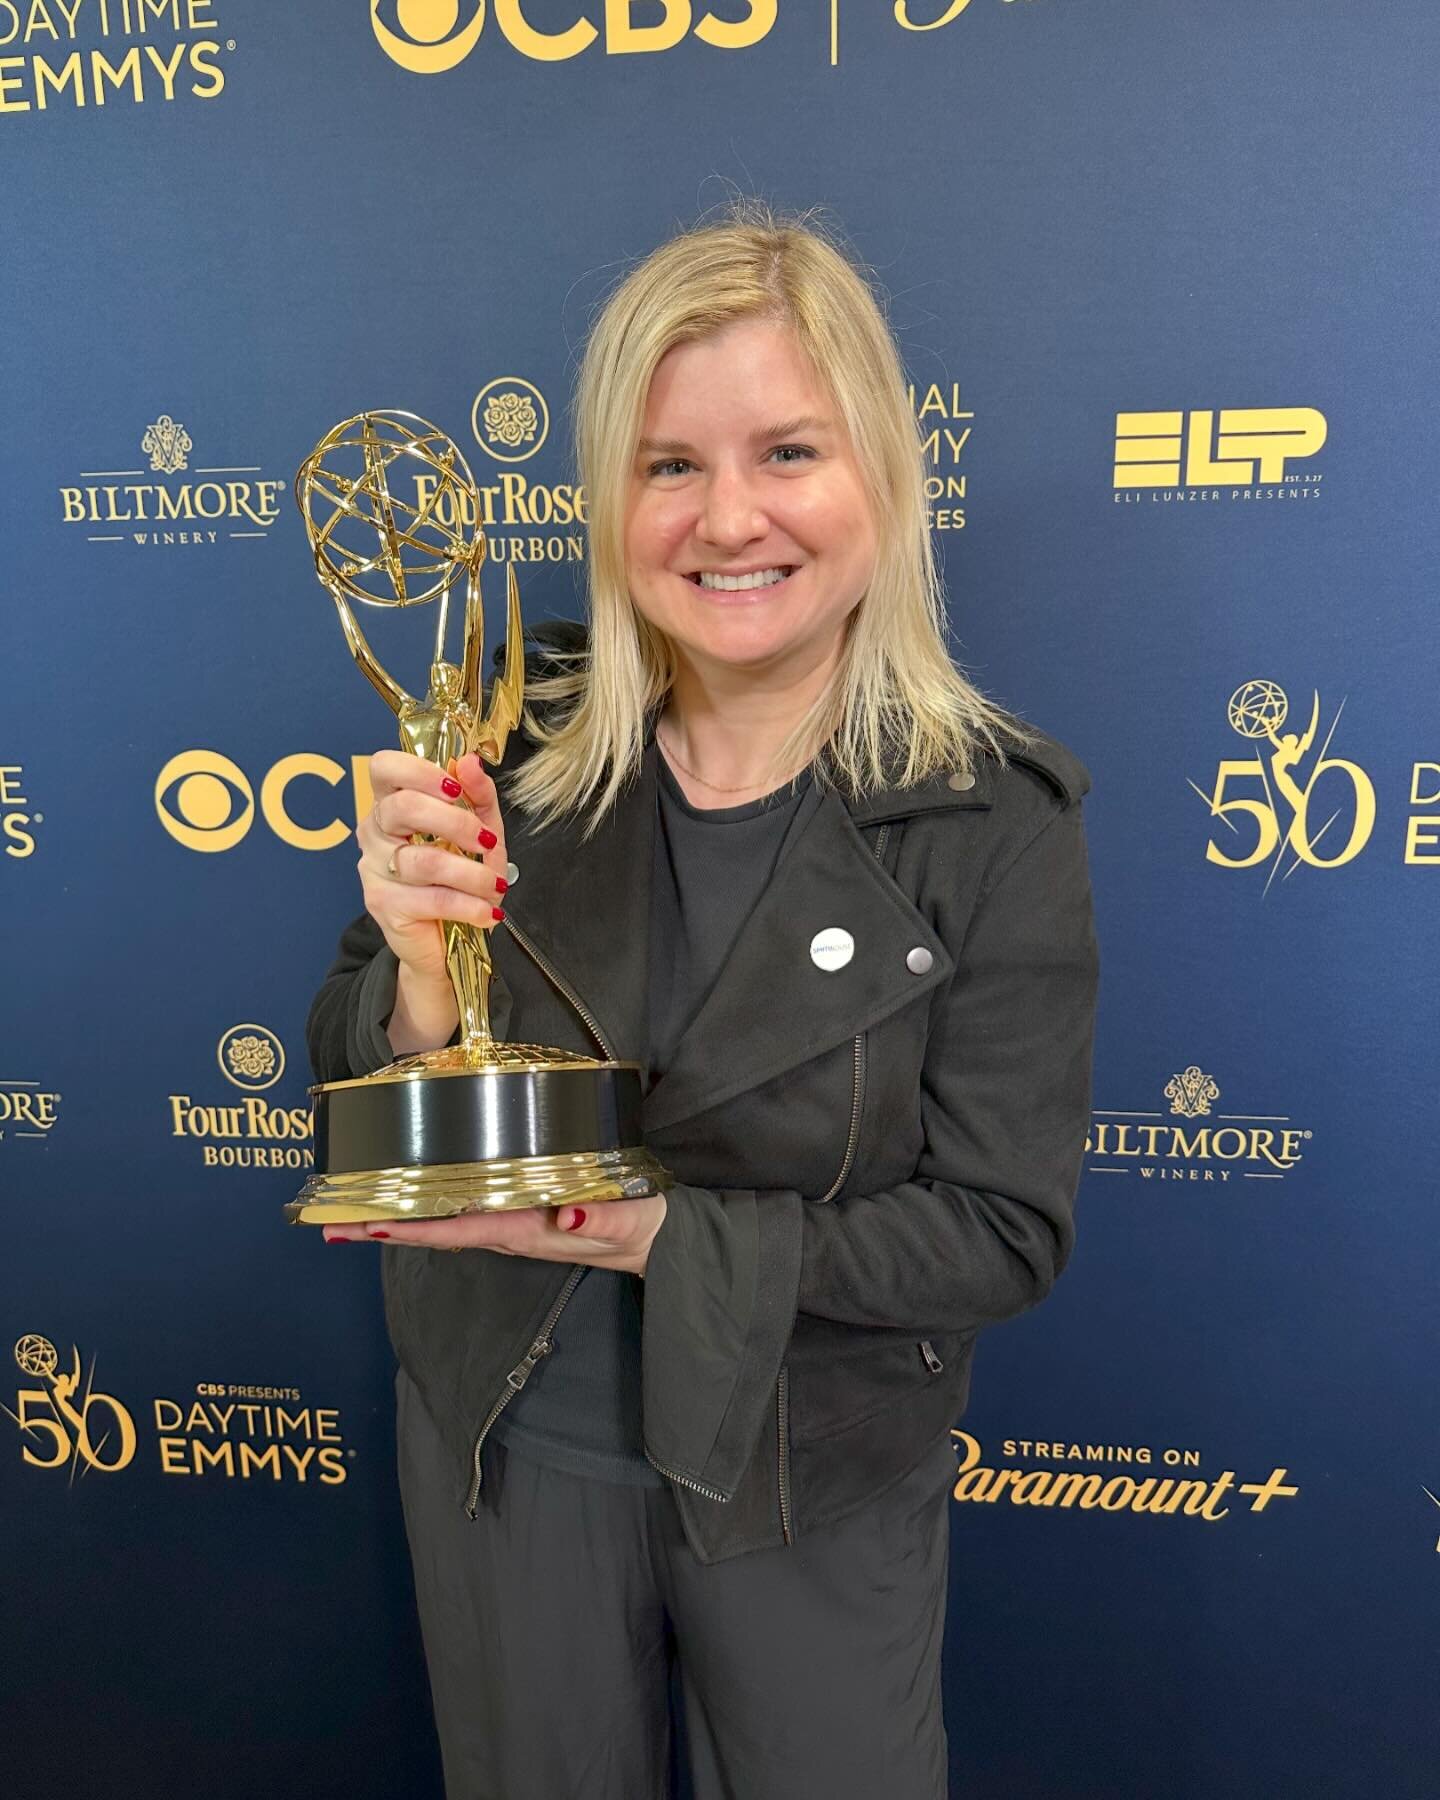 two time @daytimeemmys winner for supervising producing @entertainmenttonight! another win - @goodpeopletalent wrangled the red carpet with @smithhousestrat! icing on the cake! ✨